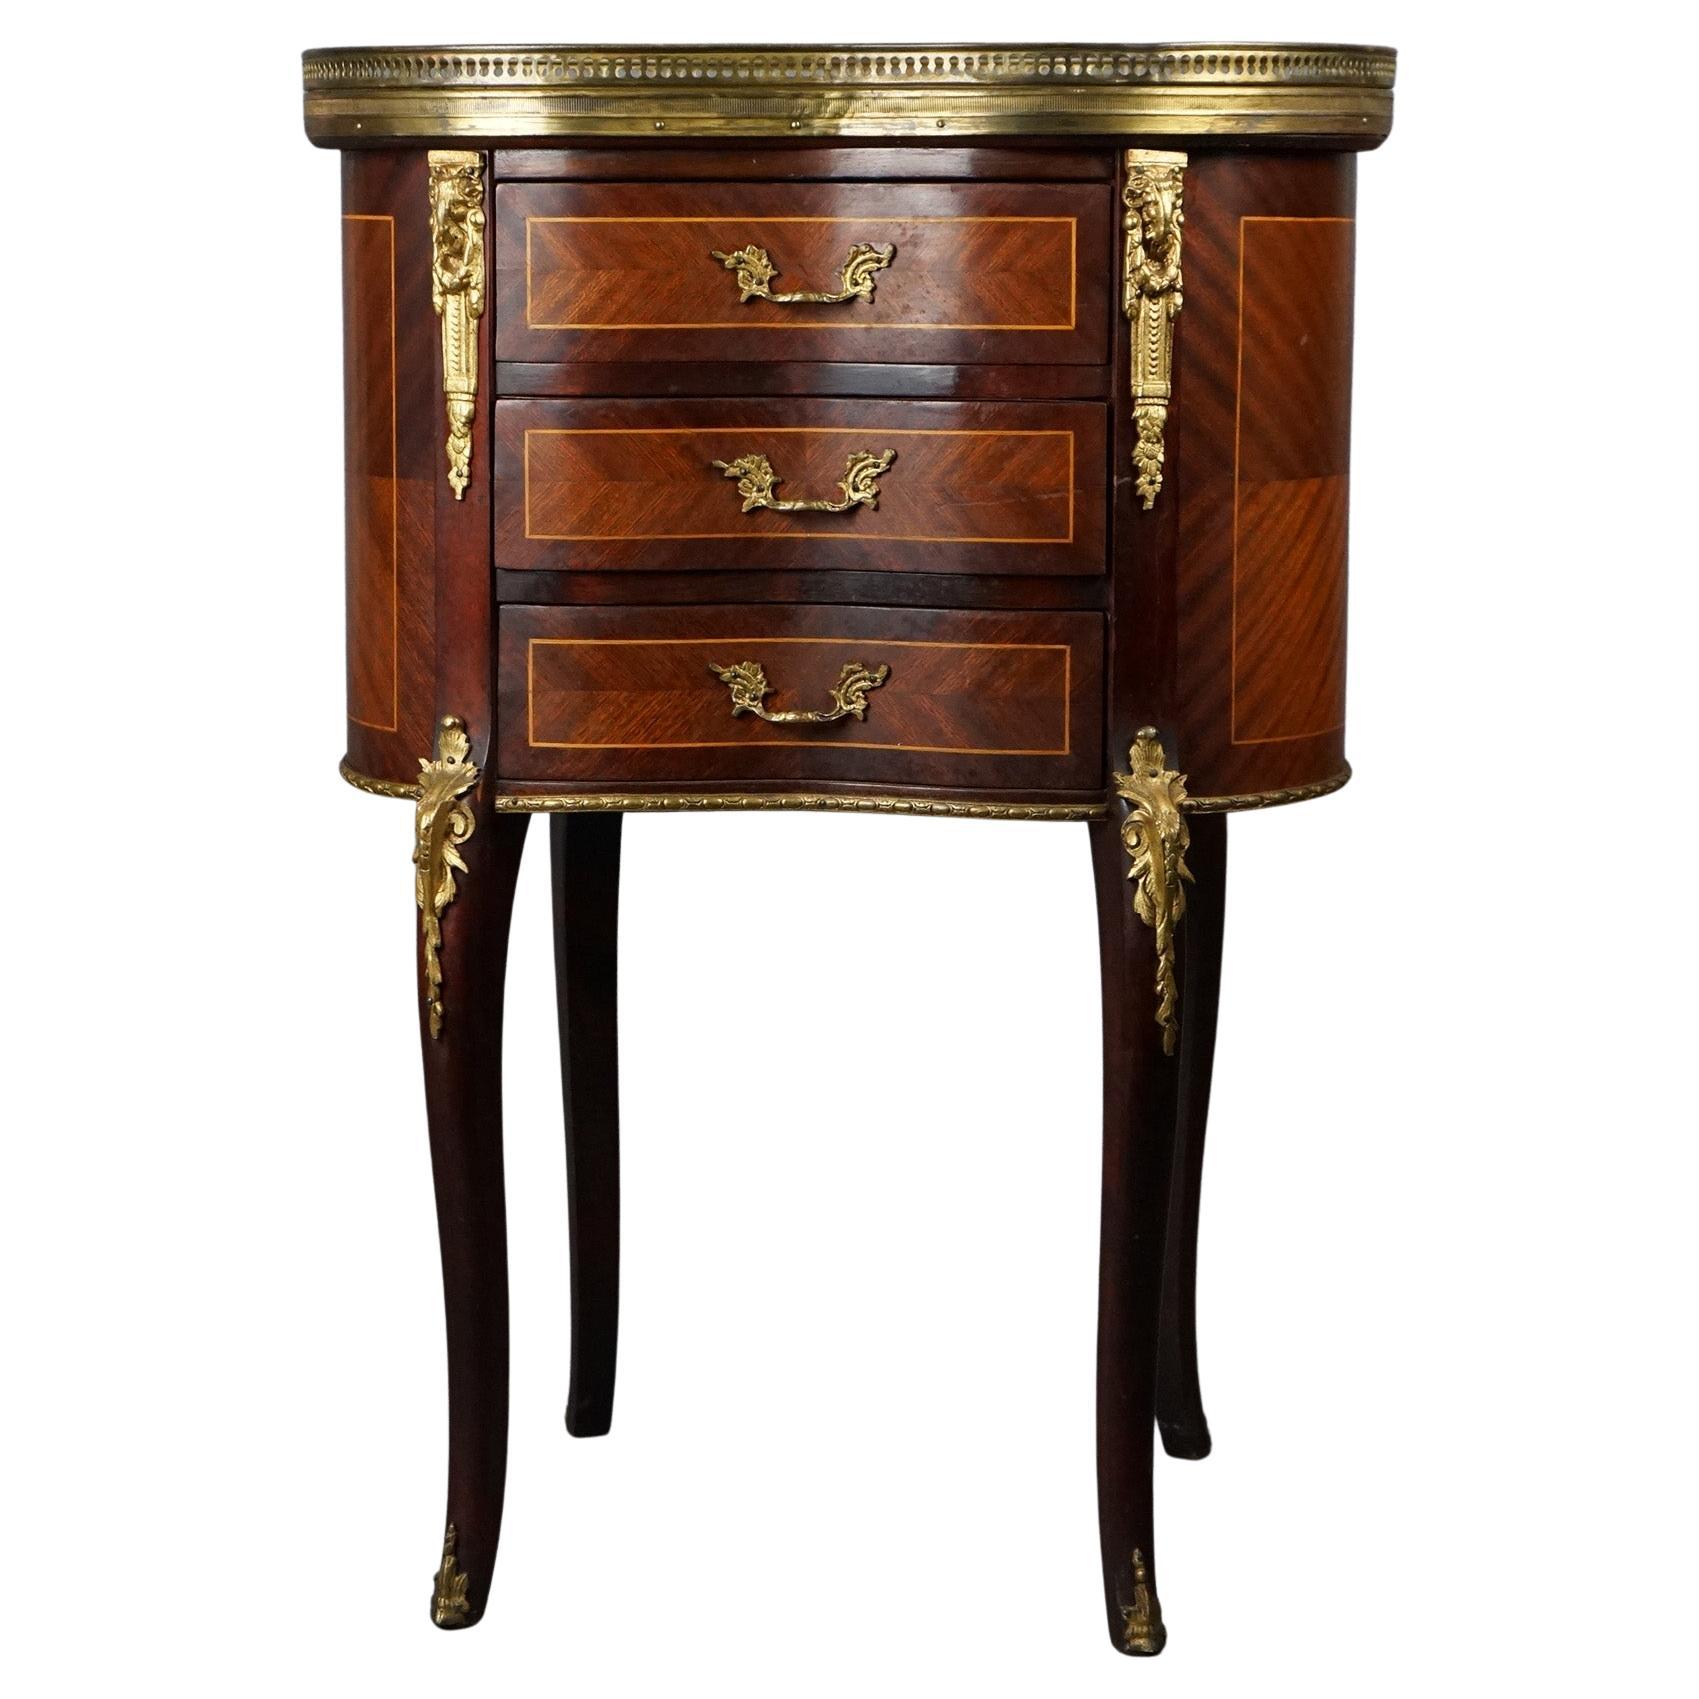 Antique French Mahogany, Kingwood, Marble & Ormolu Kidney Shaped Side Table For Sale